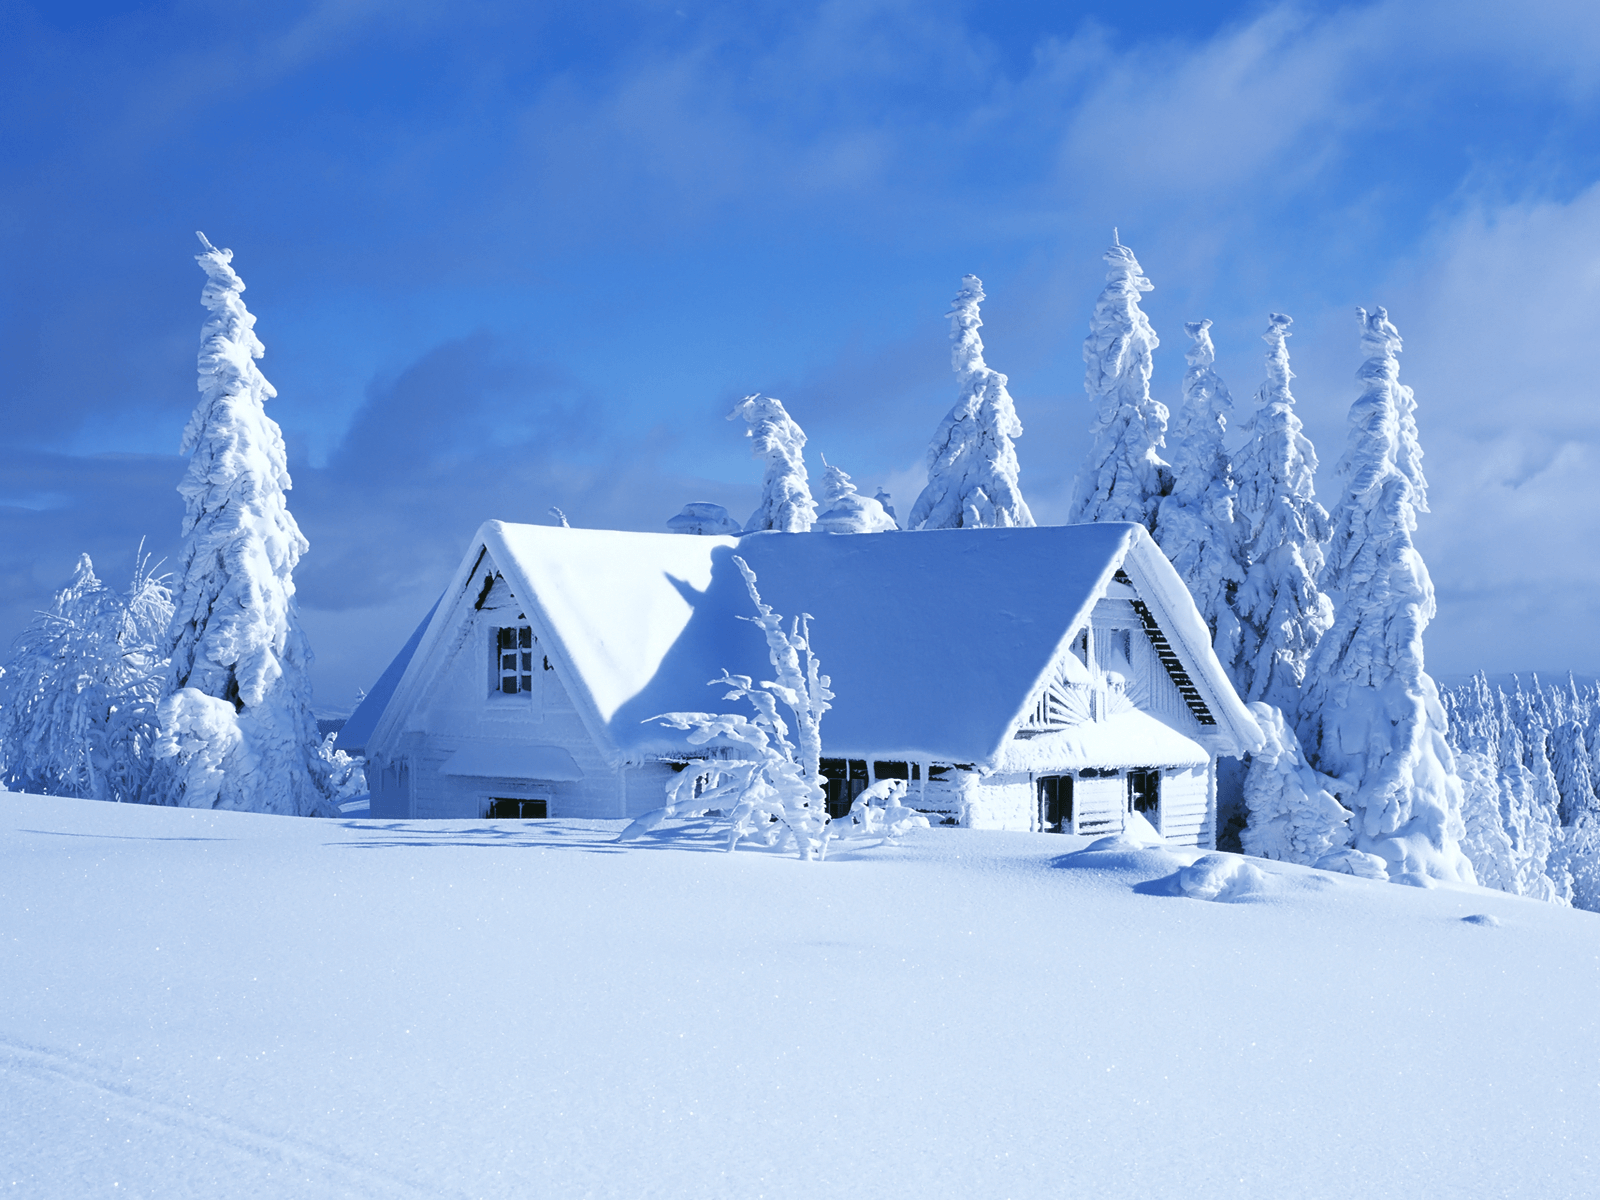 Its Cold Outside Winter Snow wallpaper. Winter snow